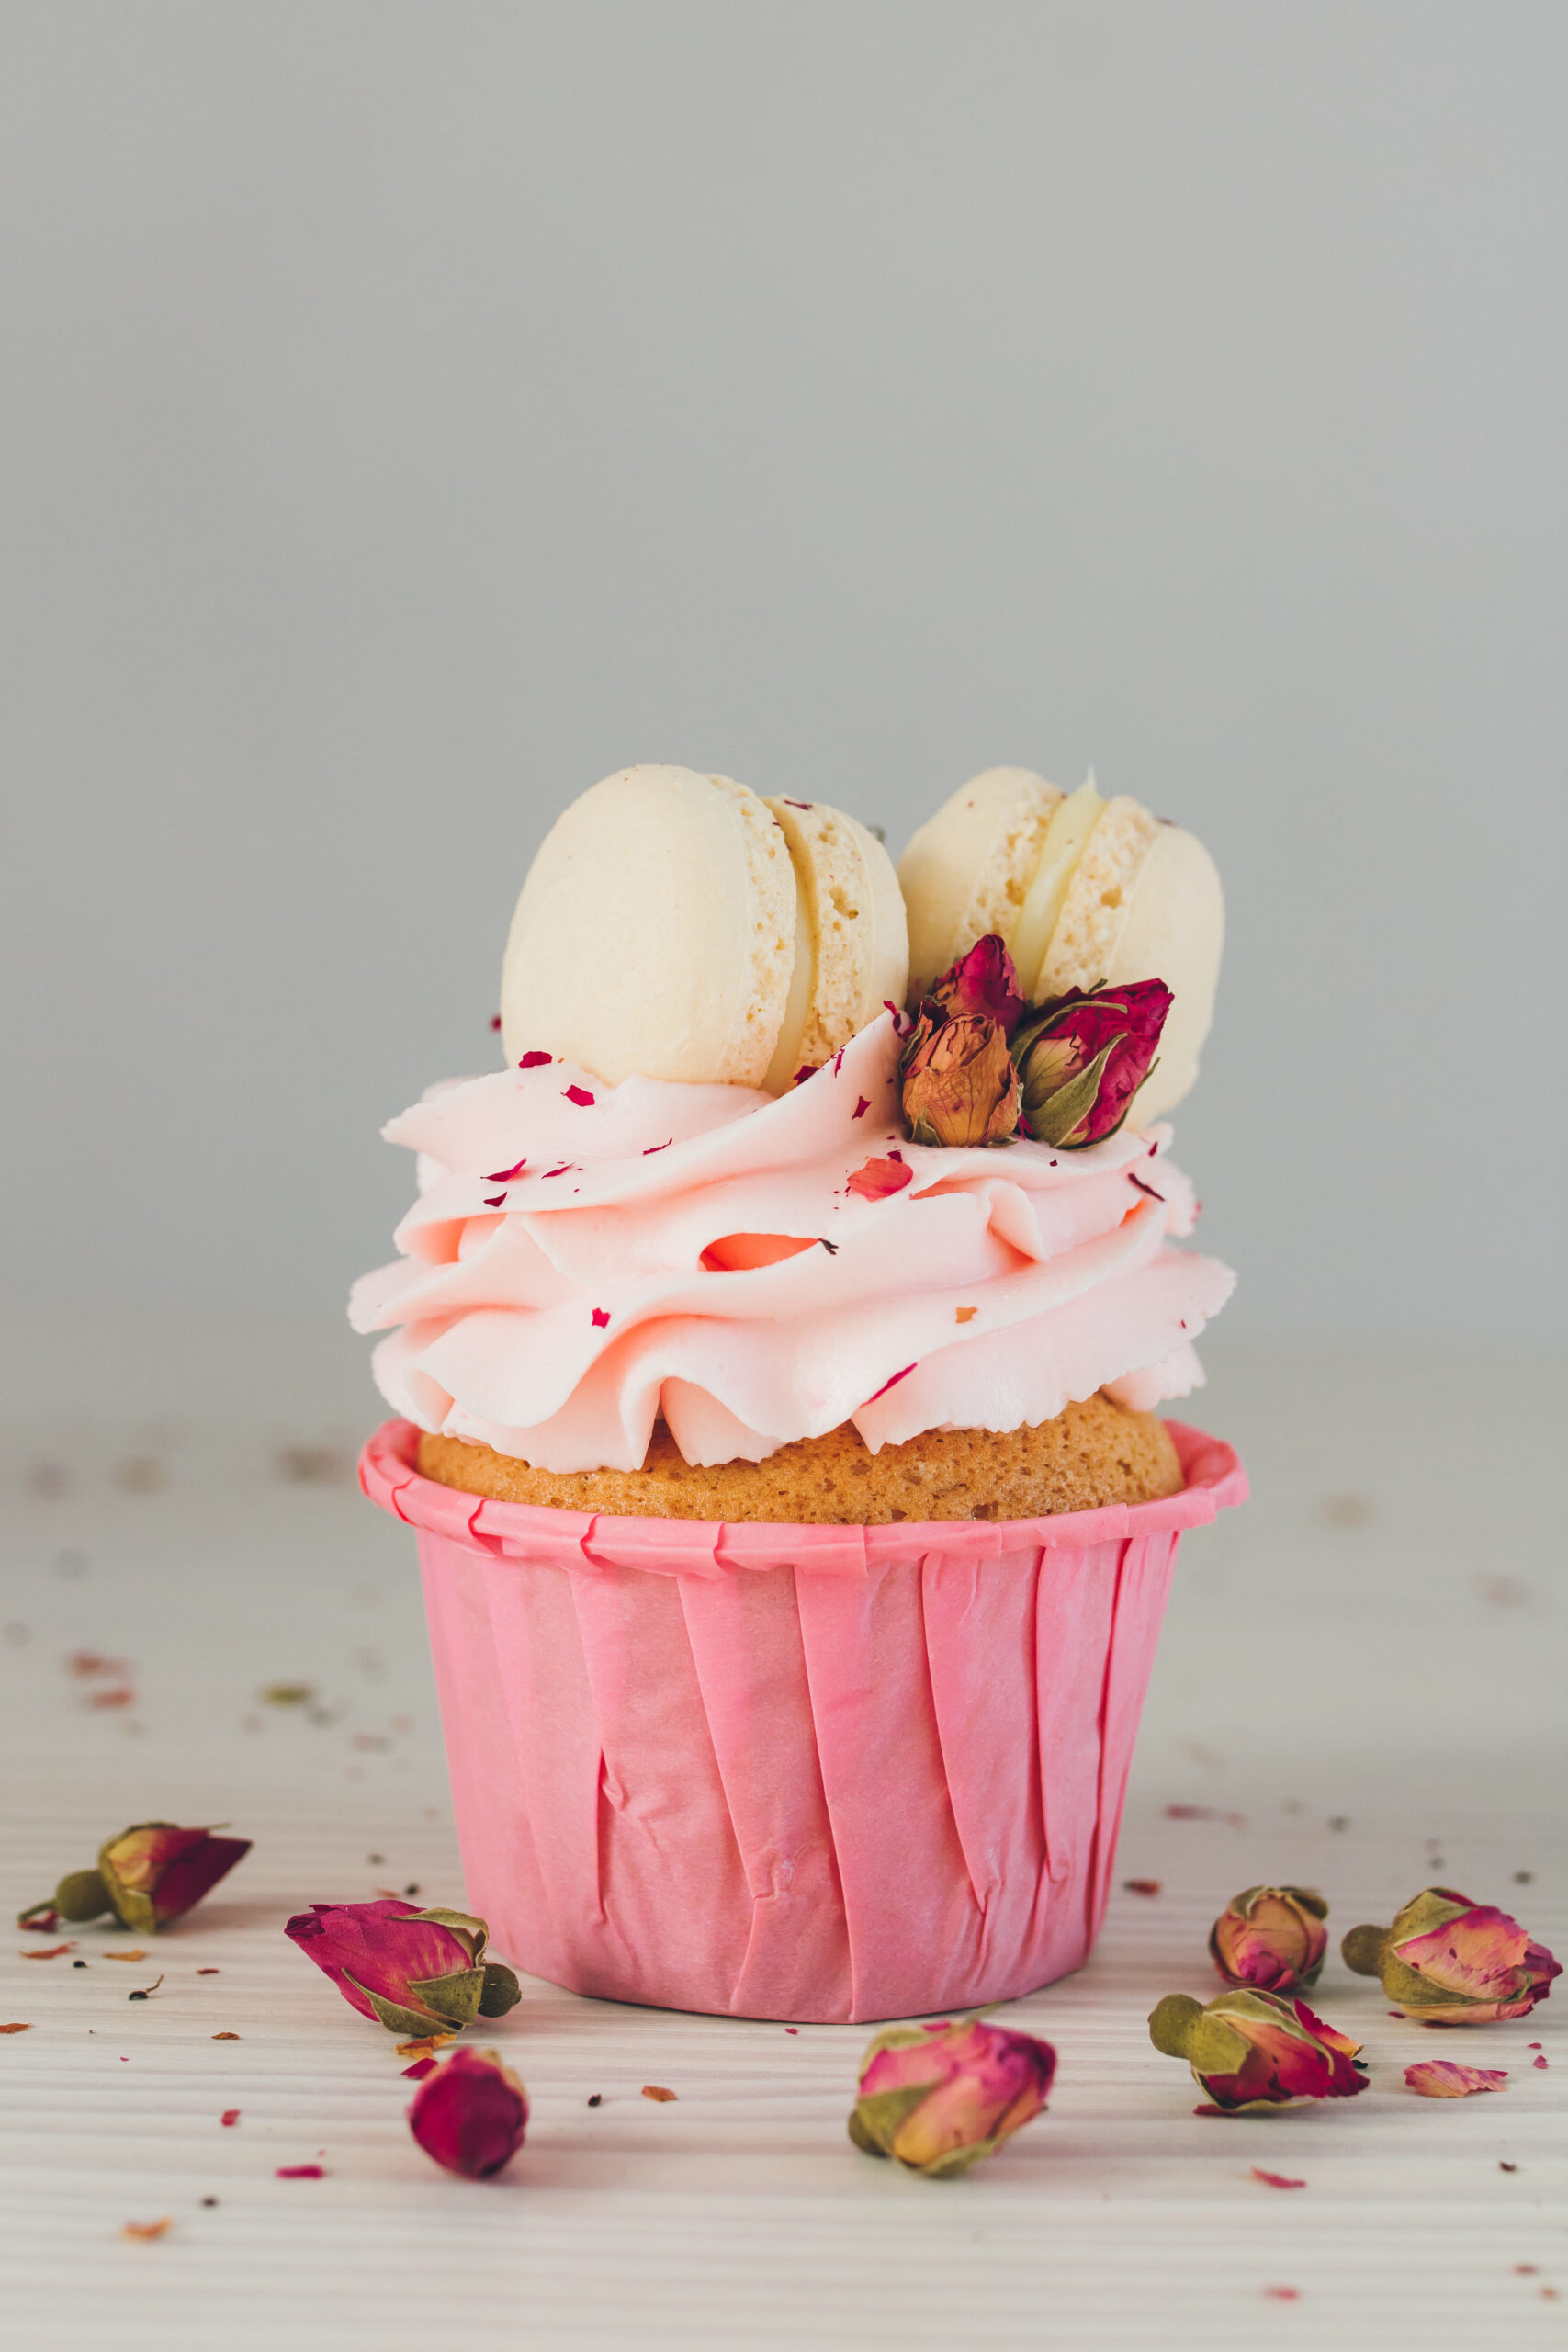 Pink Macaroon Cupcakes; fun pink valentines day cupcakes with edible roses and macaroon cookies! Delicate delicious cupcakes with pink cream, macaroons, and roses for Valentine's day.